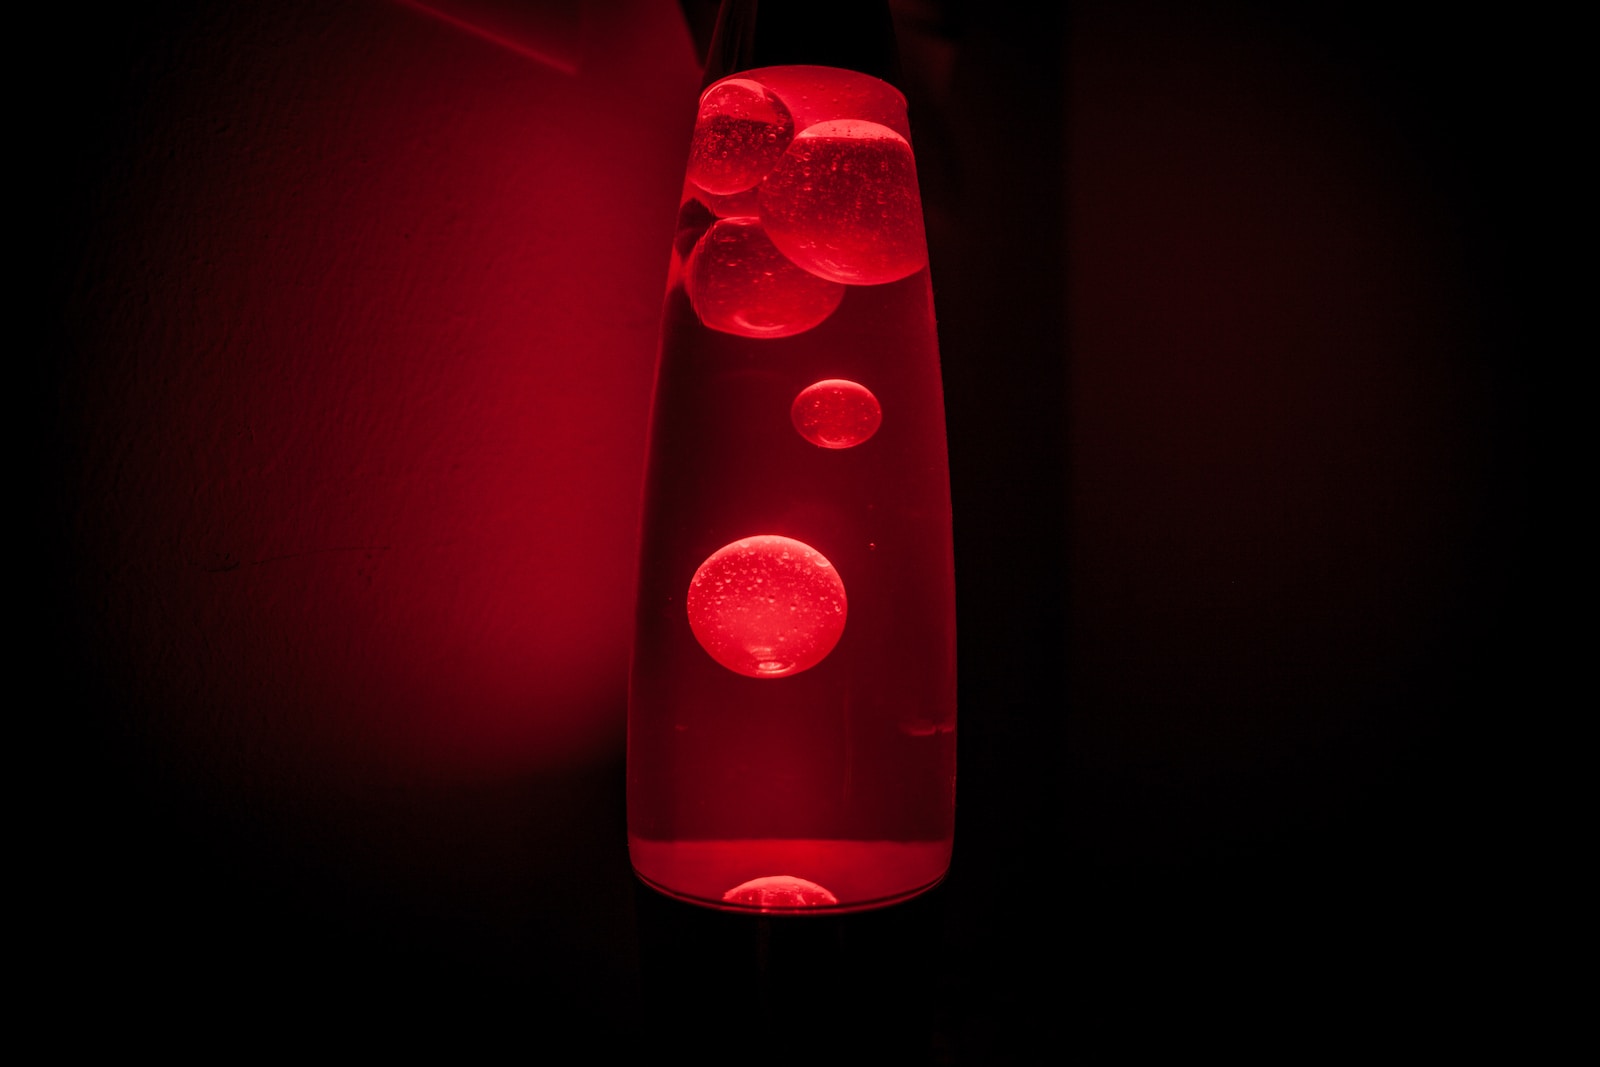 lava lamp, red and white heart shape light